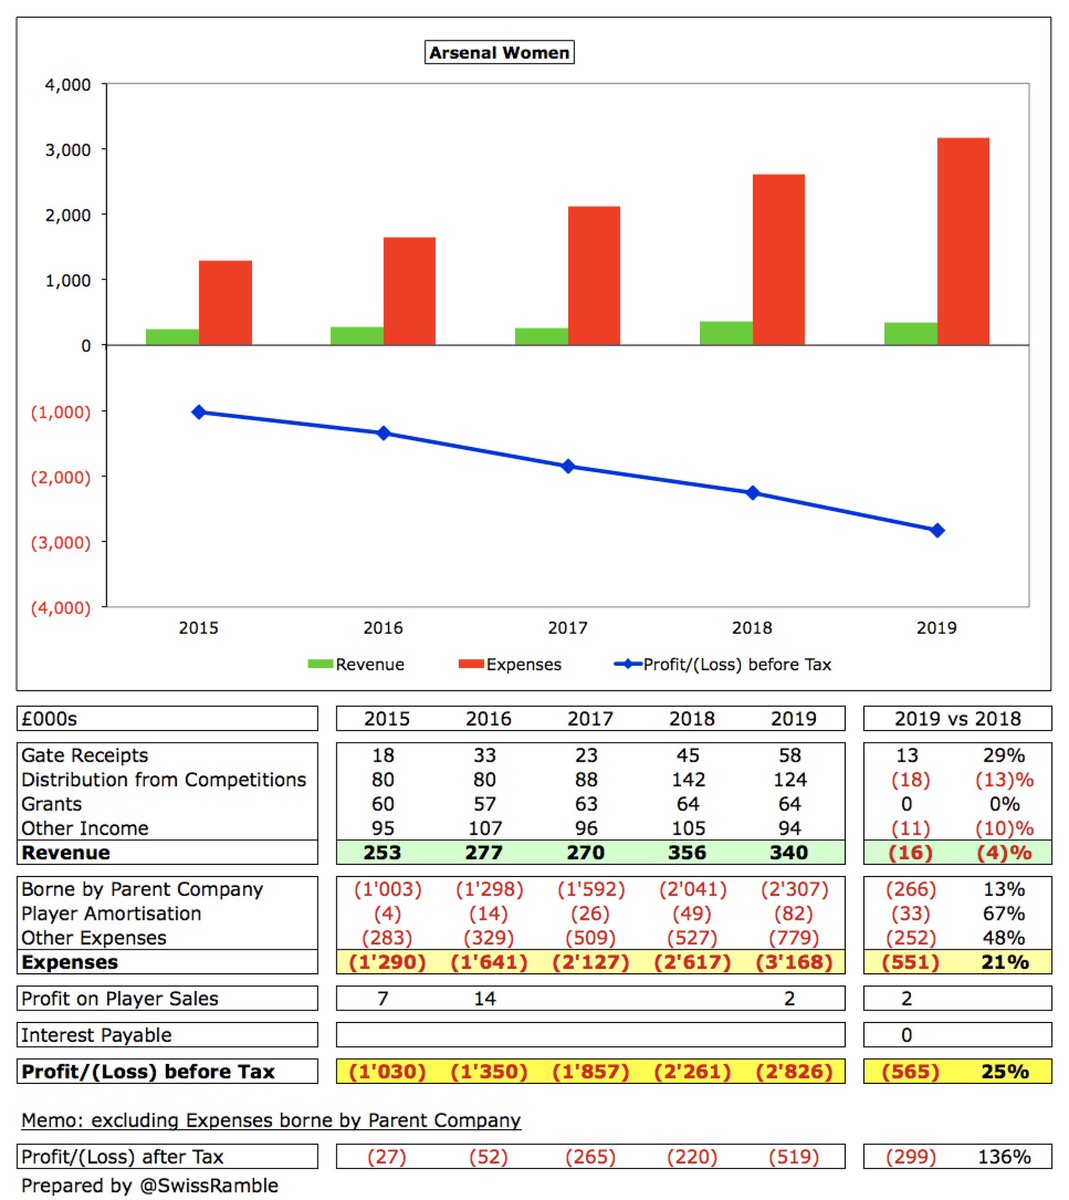 Arsenal’s reported loss in 2019 was “only” £519k, but that excluded £2.3m expenses borne by the parent company, including all headcount and wages. On that basis, losses have been steadily increasing from £1.0m four year ago to £2.8m. Revenue only £340m, due to cost subsidy.